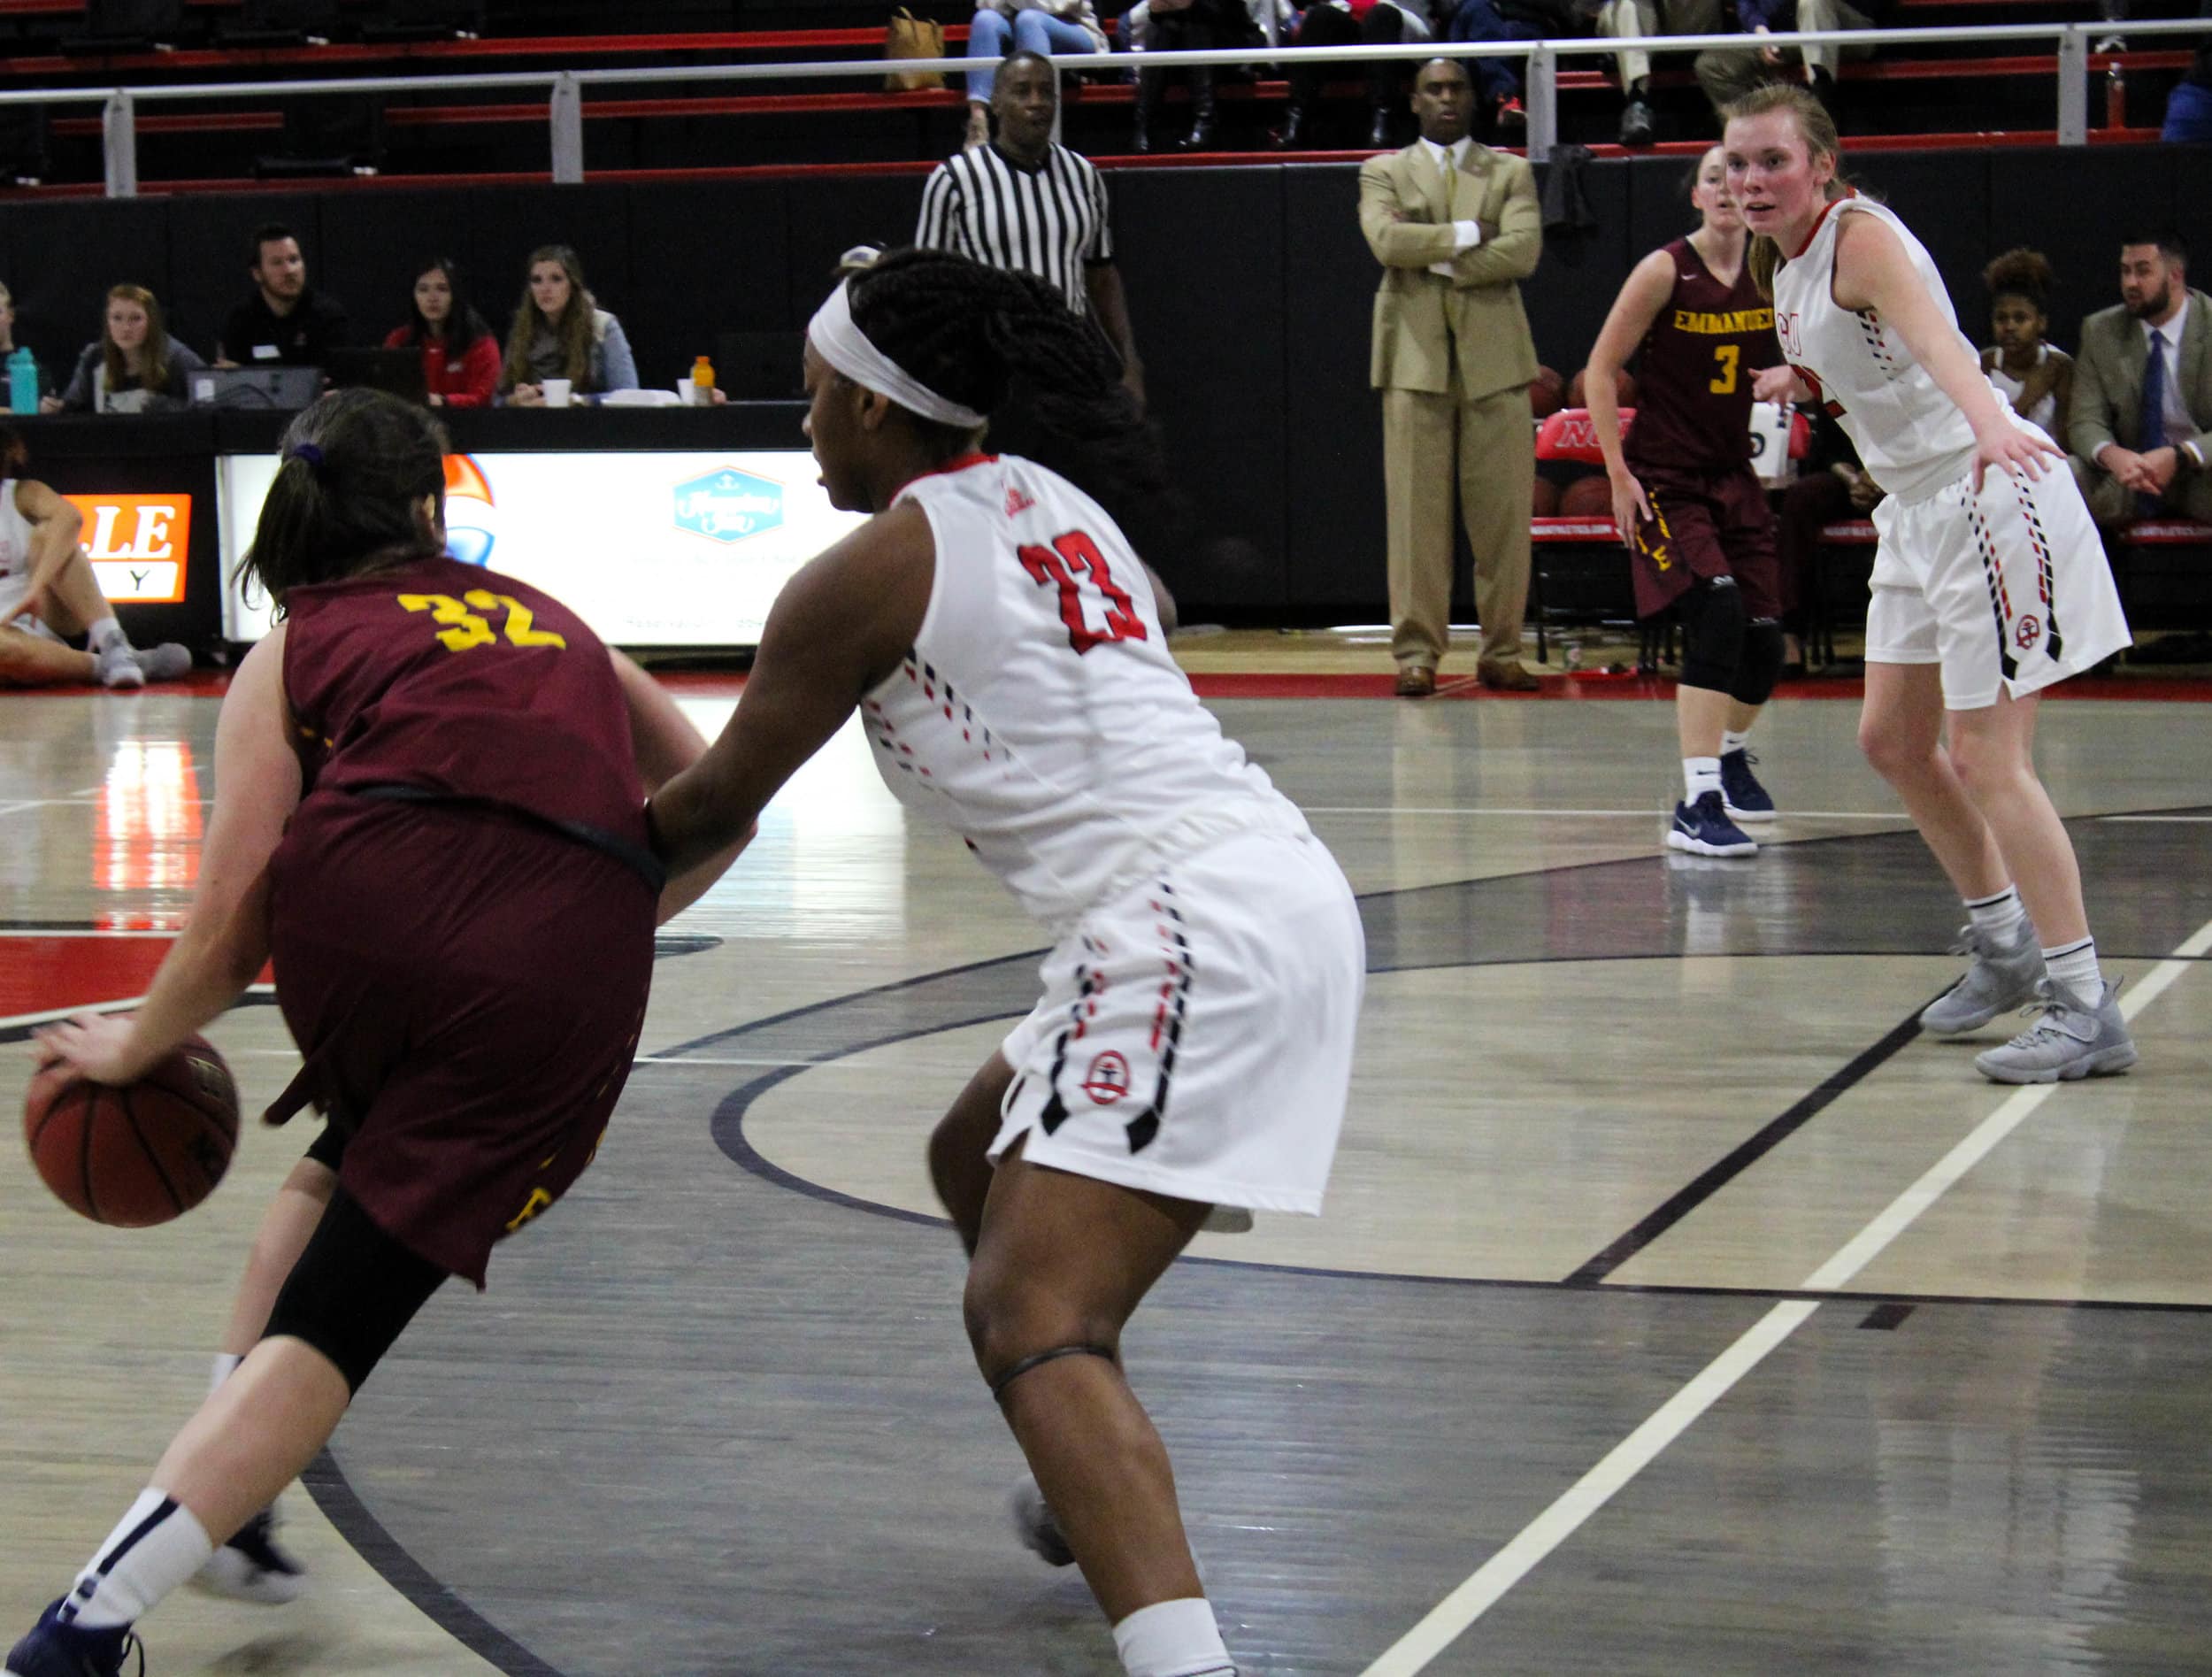 Tyana Sanders (23) guards Emmanuels point guard as she attempts to drive towards the basket.